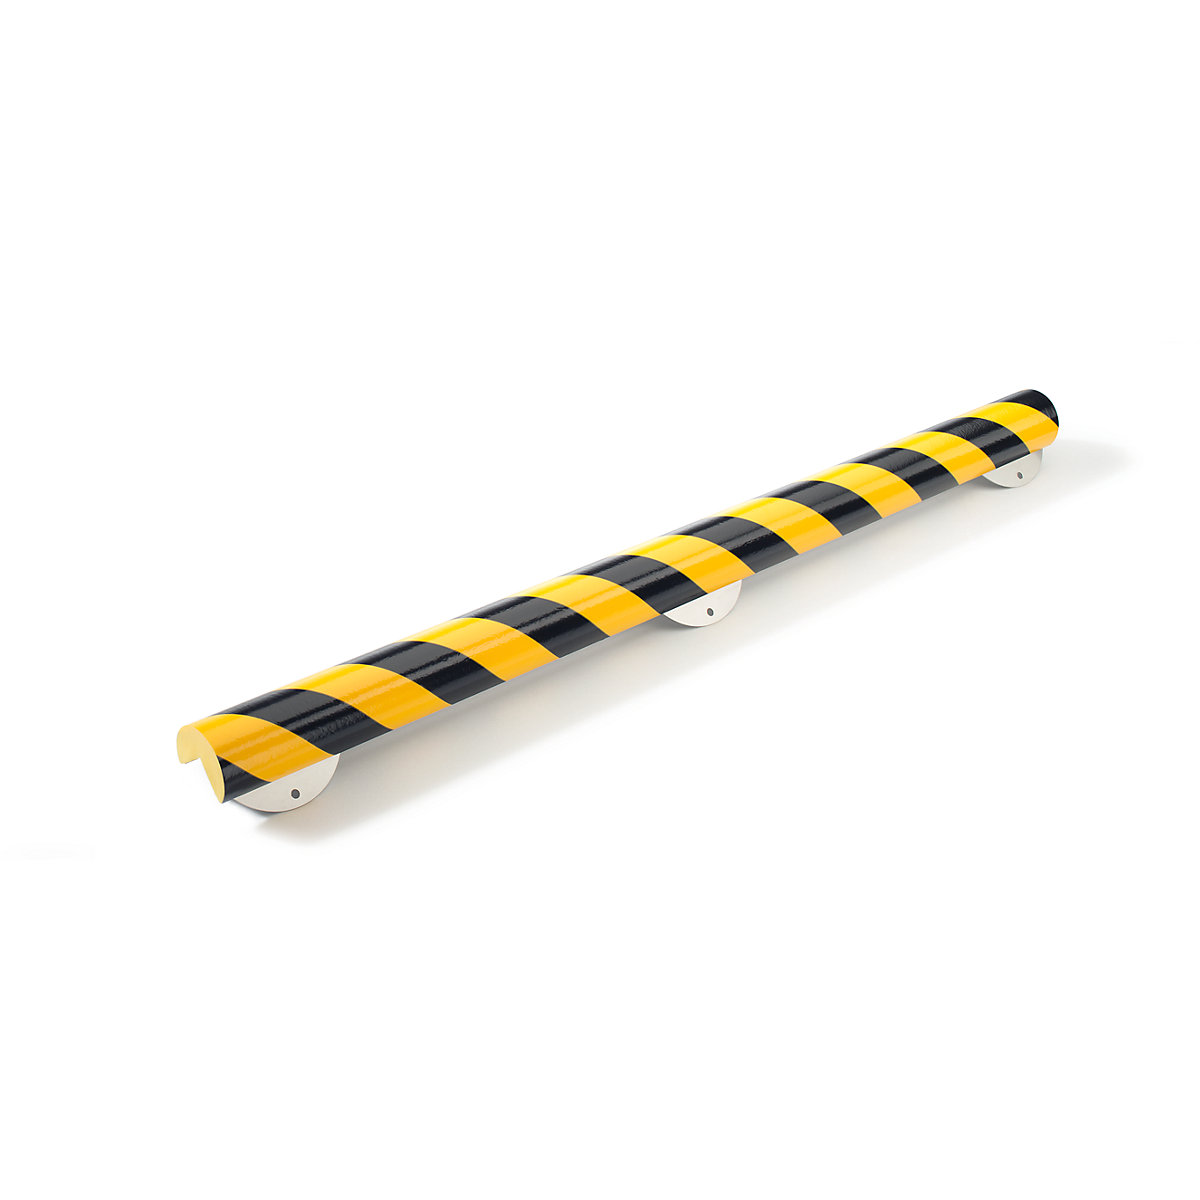 Knuffi® corner protection with mounting rail – SHG, type A+, 1 m piece, black / yellow-14